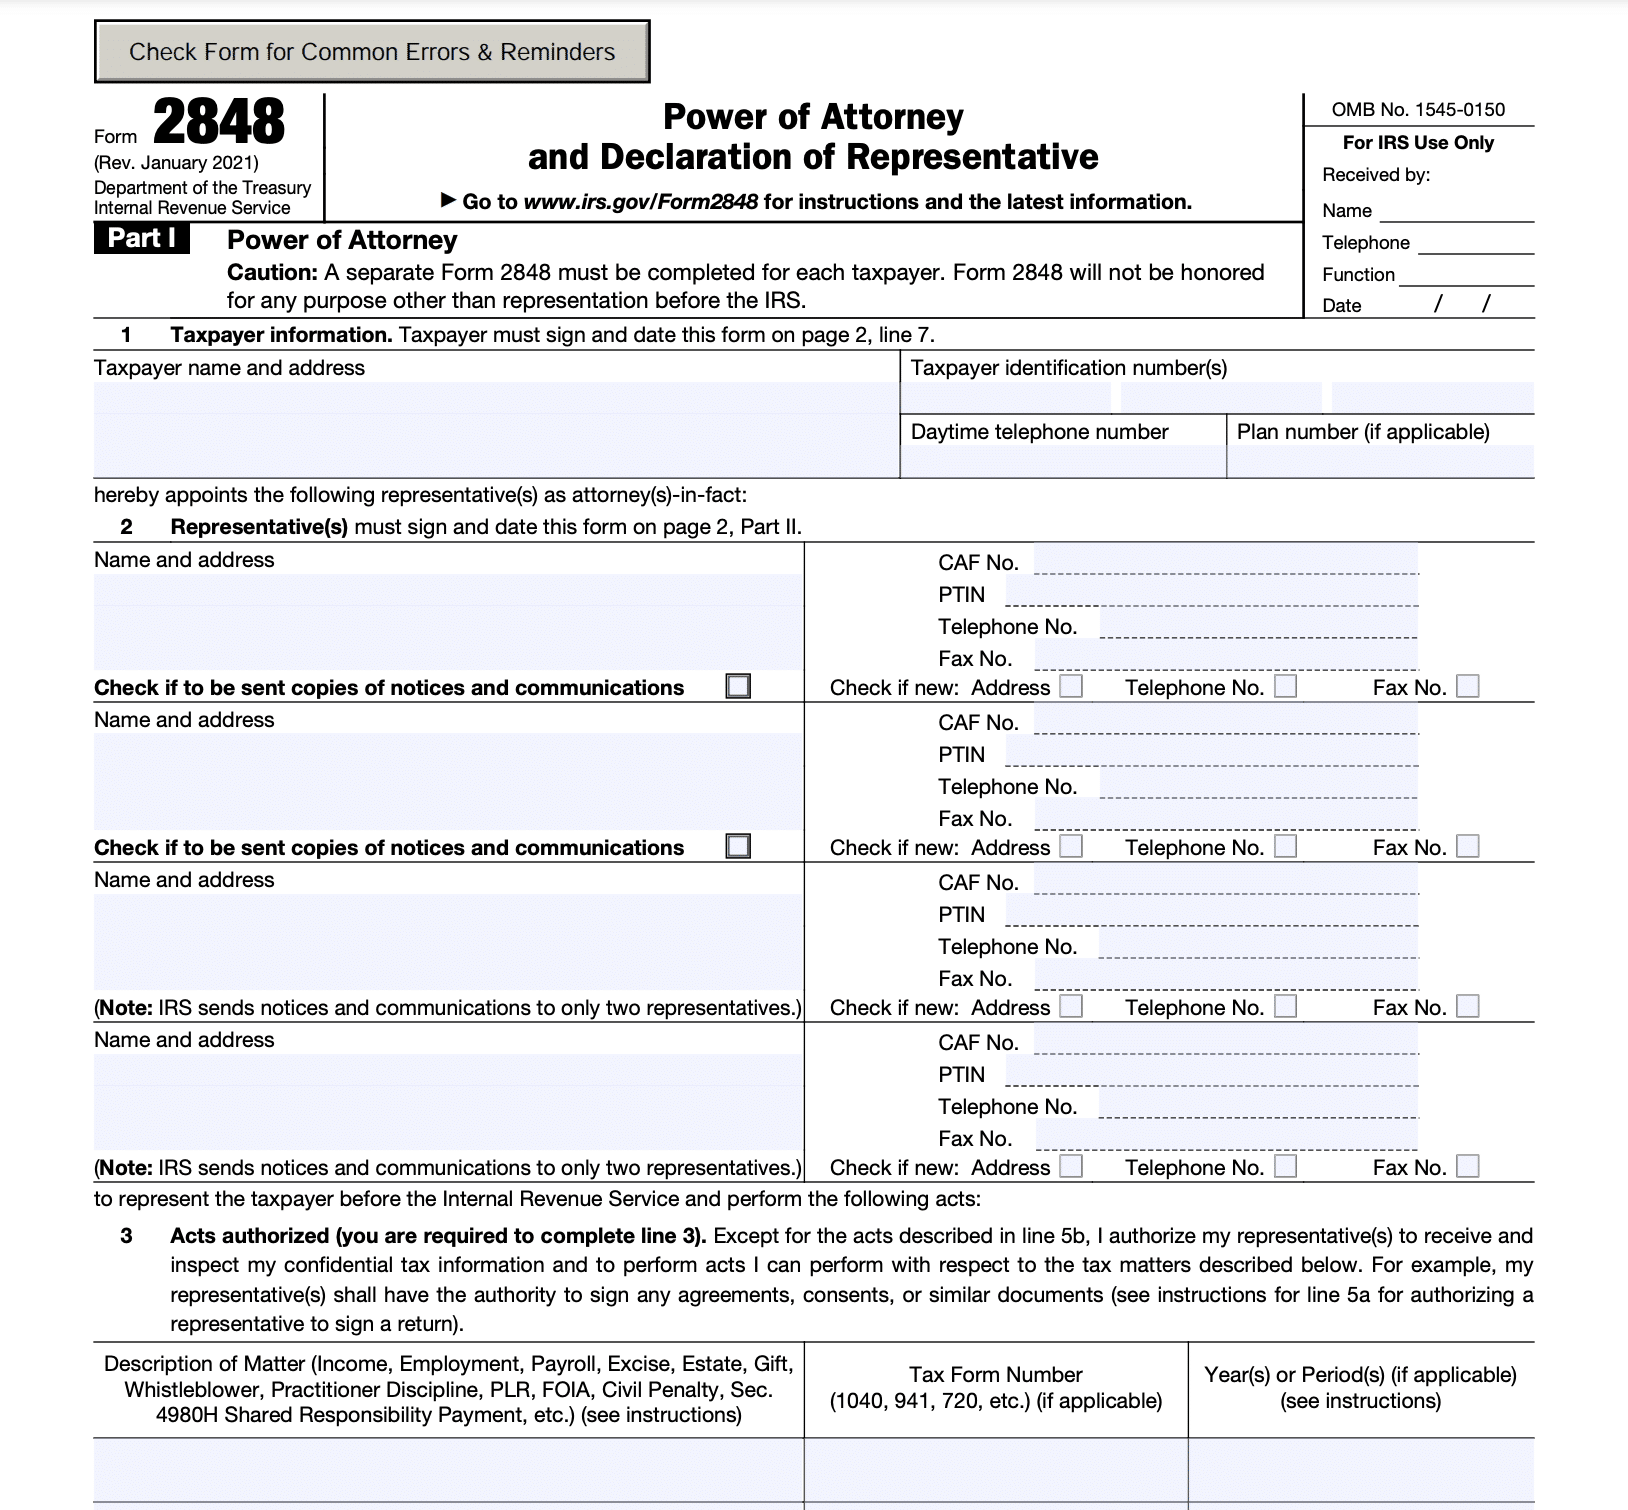 snapshot of what IRS form 2848 power of attorney looks like